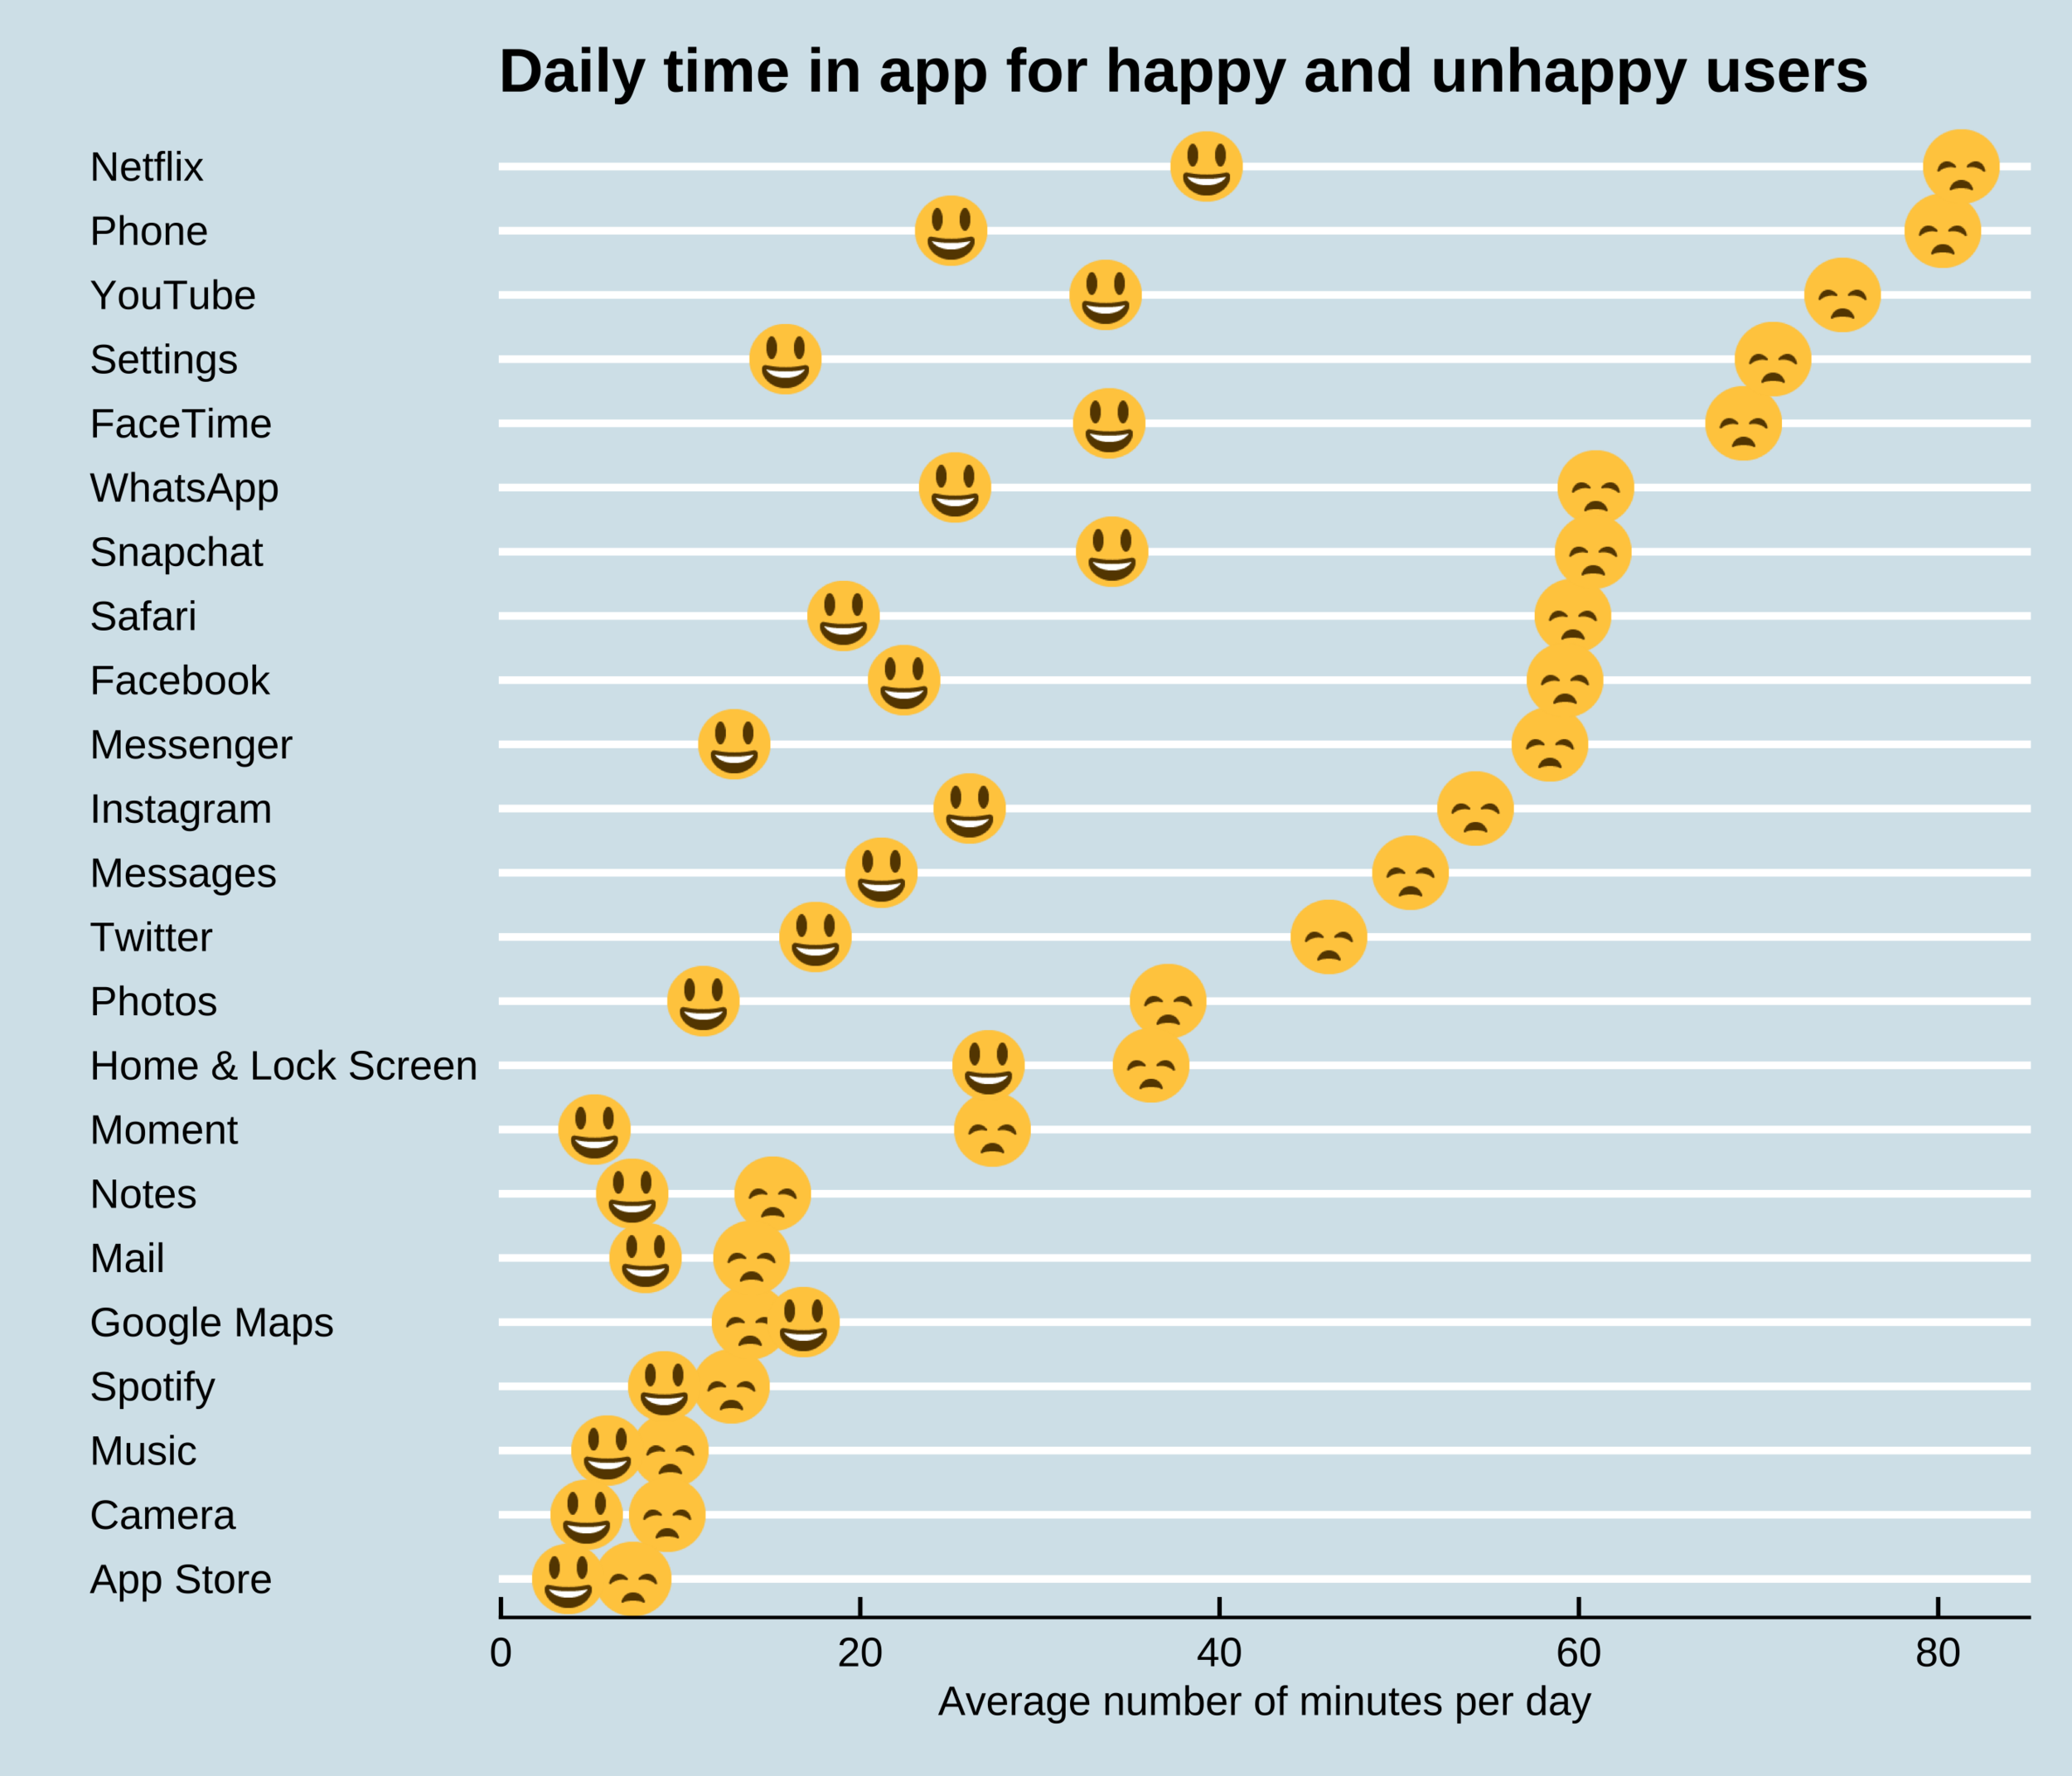 The Mobile Apps That People Regret Using Most [Infographic]